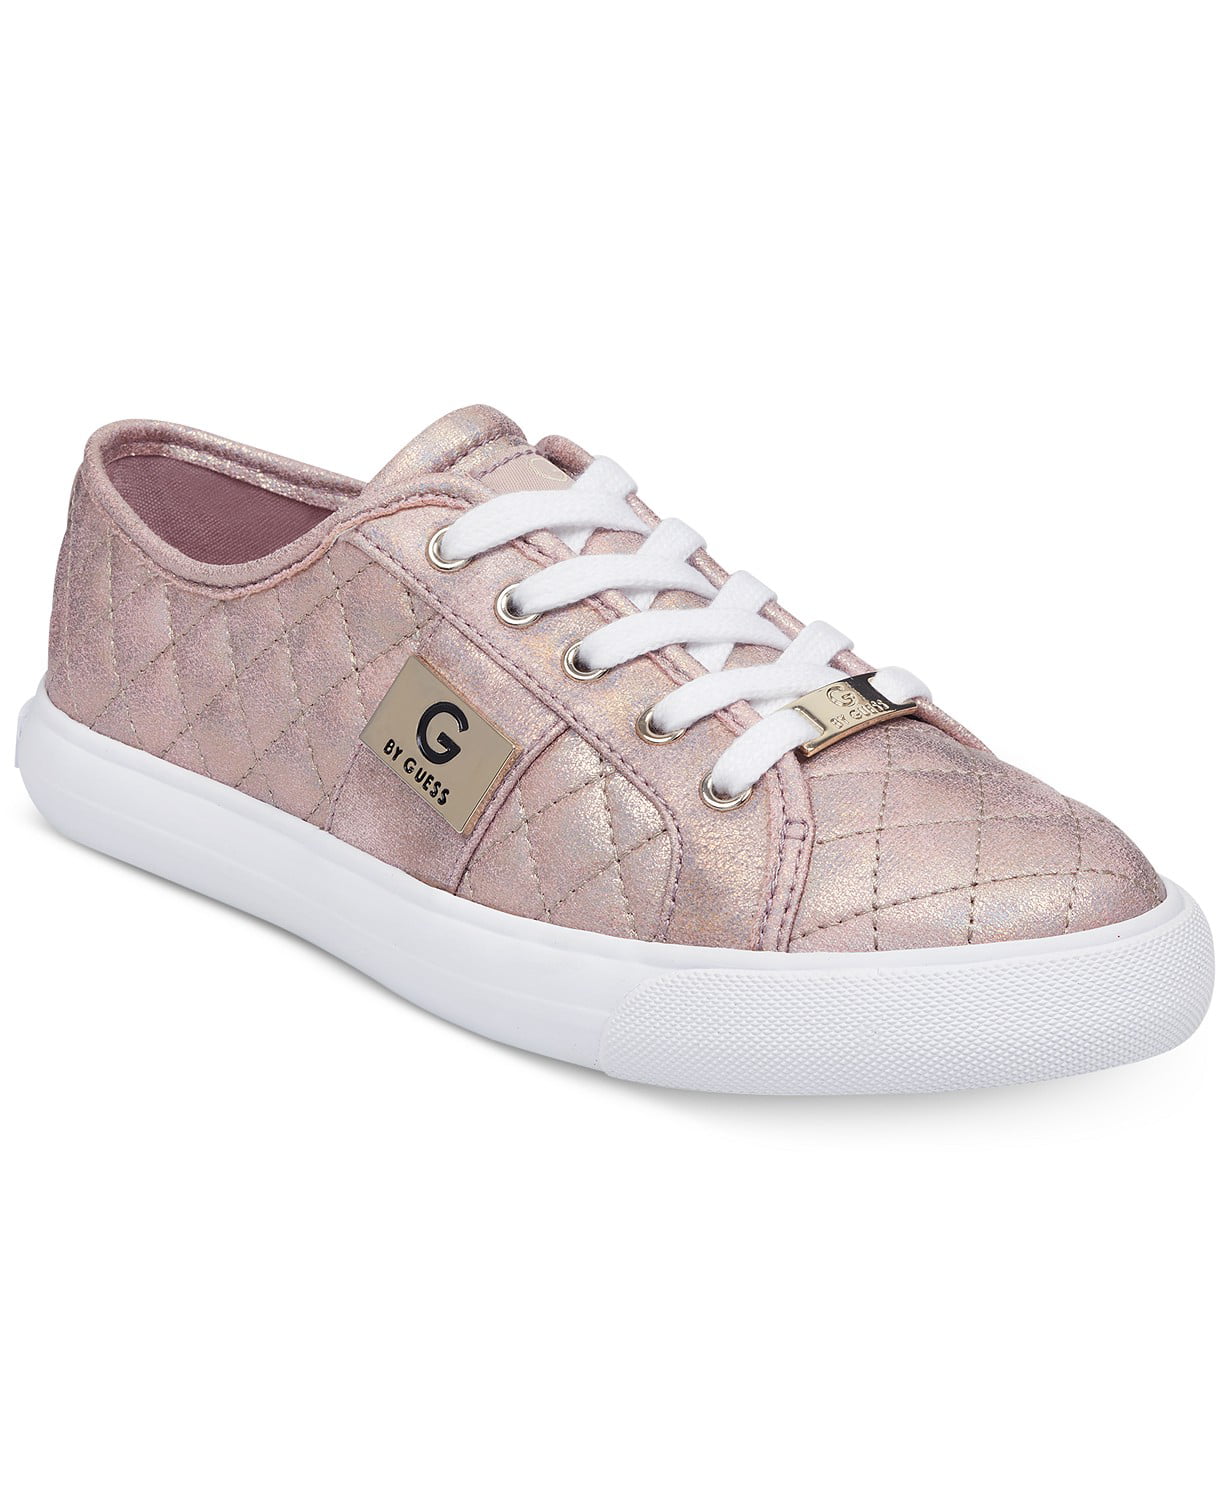 G by Guess Women's Backer2 Lace Up 